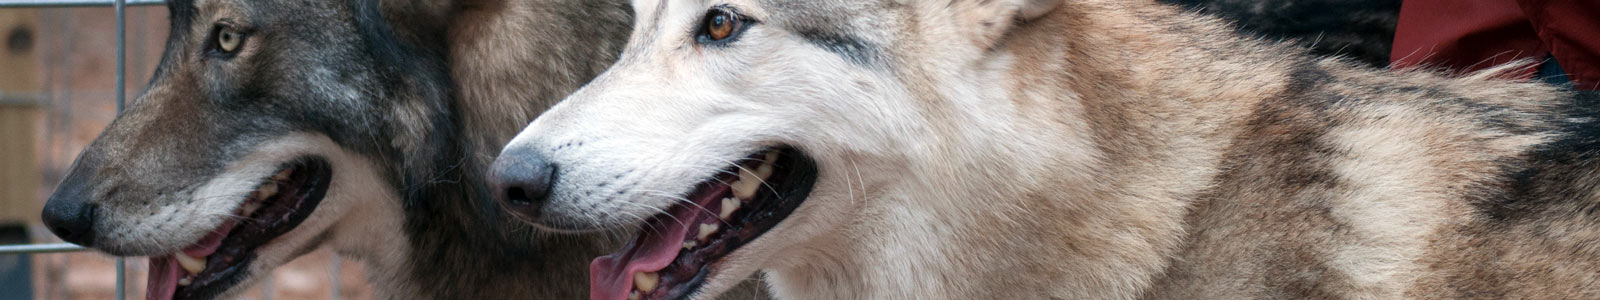 Texas Wolfdog Project Long-Term Residents - Detail Header Image